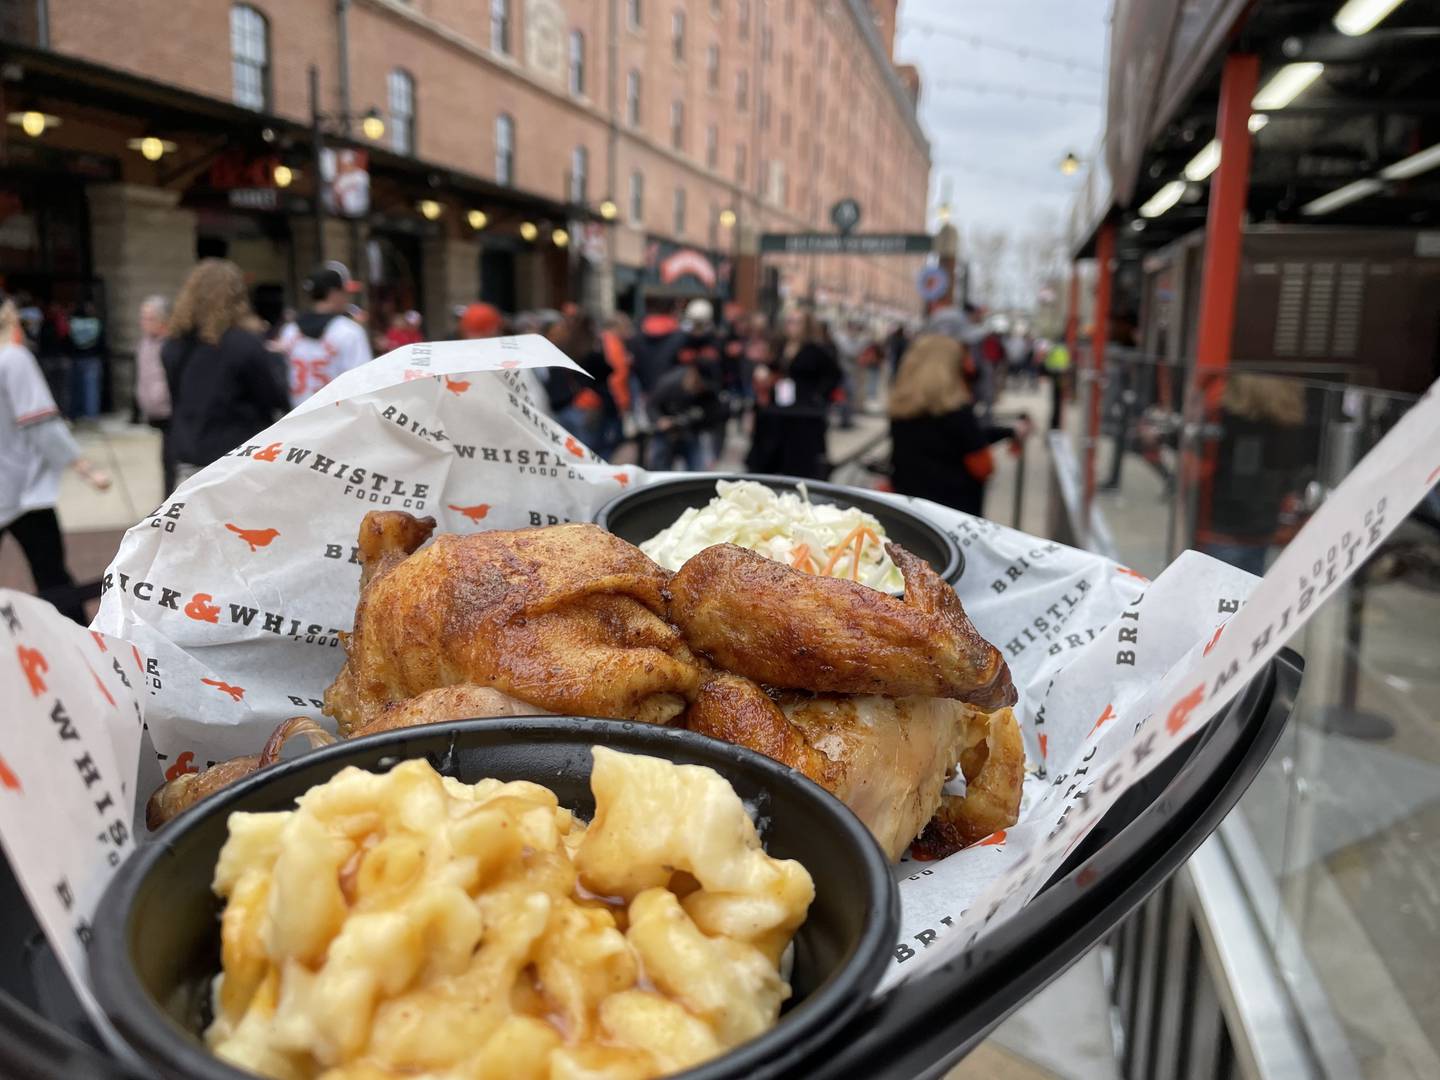 You can now get a half of a rotisserie chicken at Camden Yards. But should you?